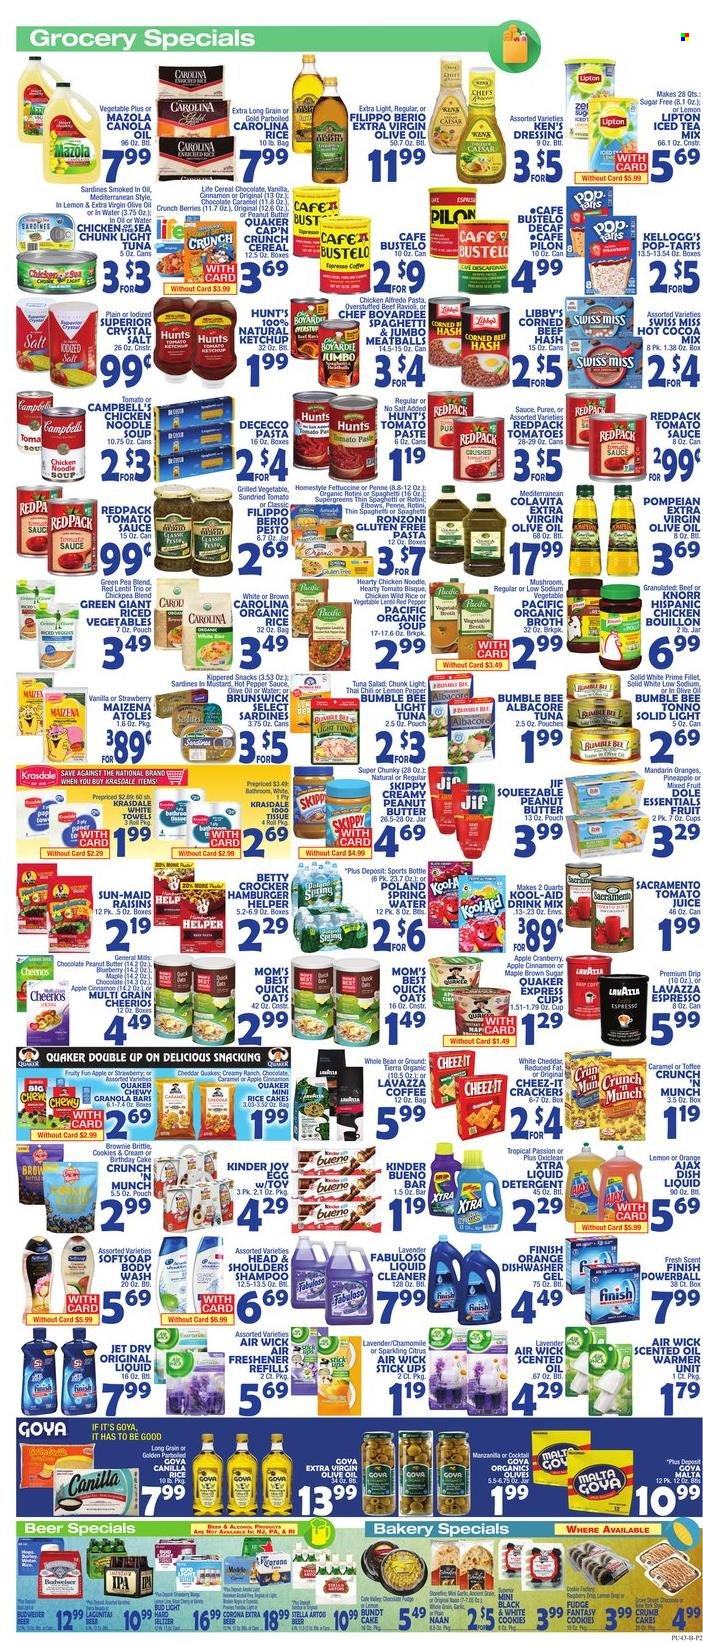 thumbnail - Bravo Supermarkets Flyer - 01/21/2022 - 01/27/2022 - Sales products - mushrooms, bundt, brownies, salad, Dole, mandarines, oranges, sardines, tuna, beef hash, Campbell's, meatballs, soup, pasta, Bumble Bee, Knorr, noodles cup, Quaker, noodles, tuna salad, Swiss Miss, eggs, cookies, fudge, chocolate, snack, Kinder Joy, crackers, Kellogg's, Kinder Bueno, Pop-Tarts, Cheez-It, bouillon, oats, broth, Maizena, tomato sauce, olives, light tuna, Goya, Chef Boyardee, cereals, Cheerios, granola bar, Quick Oats, Mom's Best, penne, ketchup, pesto, dressing, canola oil, extra virgin olive oil, olive oil, oil, peanut butter, Jif, raisins, dried fruit, tomato juice, juice, Lipton, ice tea, spring water, hot cocoa, coffee, Lavazza, Hard Seltzer, beer, Corona Extra, IPA, tissues, detergent, cleaner, liquid cleaner, Ajax, Fabuloso, liquid detergent, XTRA, dishwashing liquid, Finish Powerball, Jet, body wash, shampoo, Softsoap, Head & Shoulders, bag. Page 2.